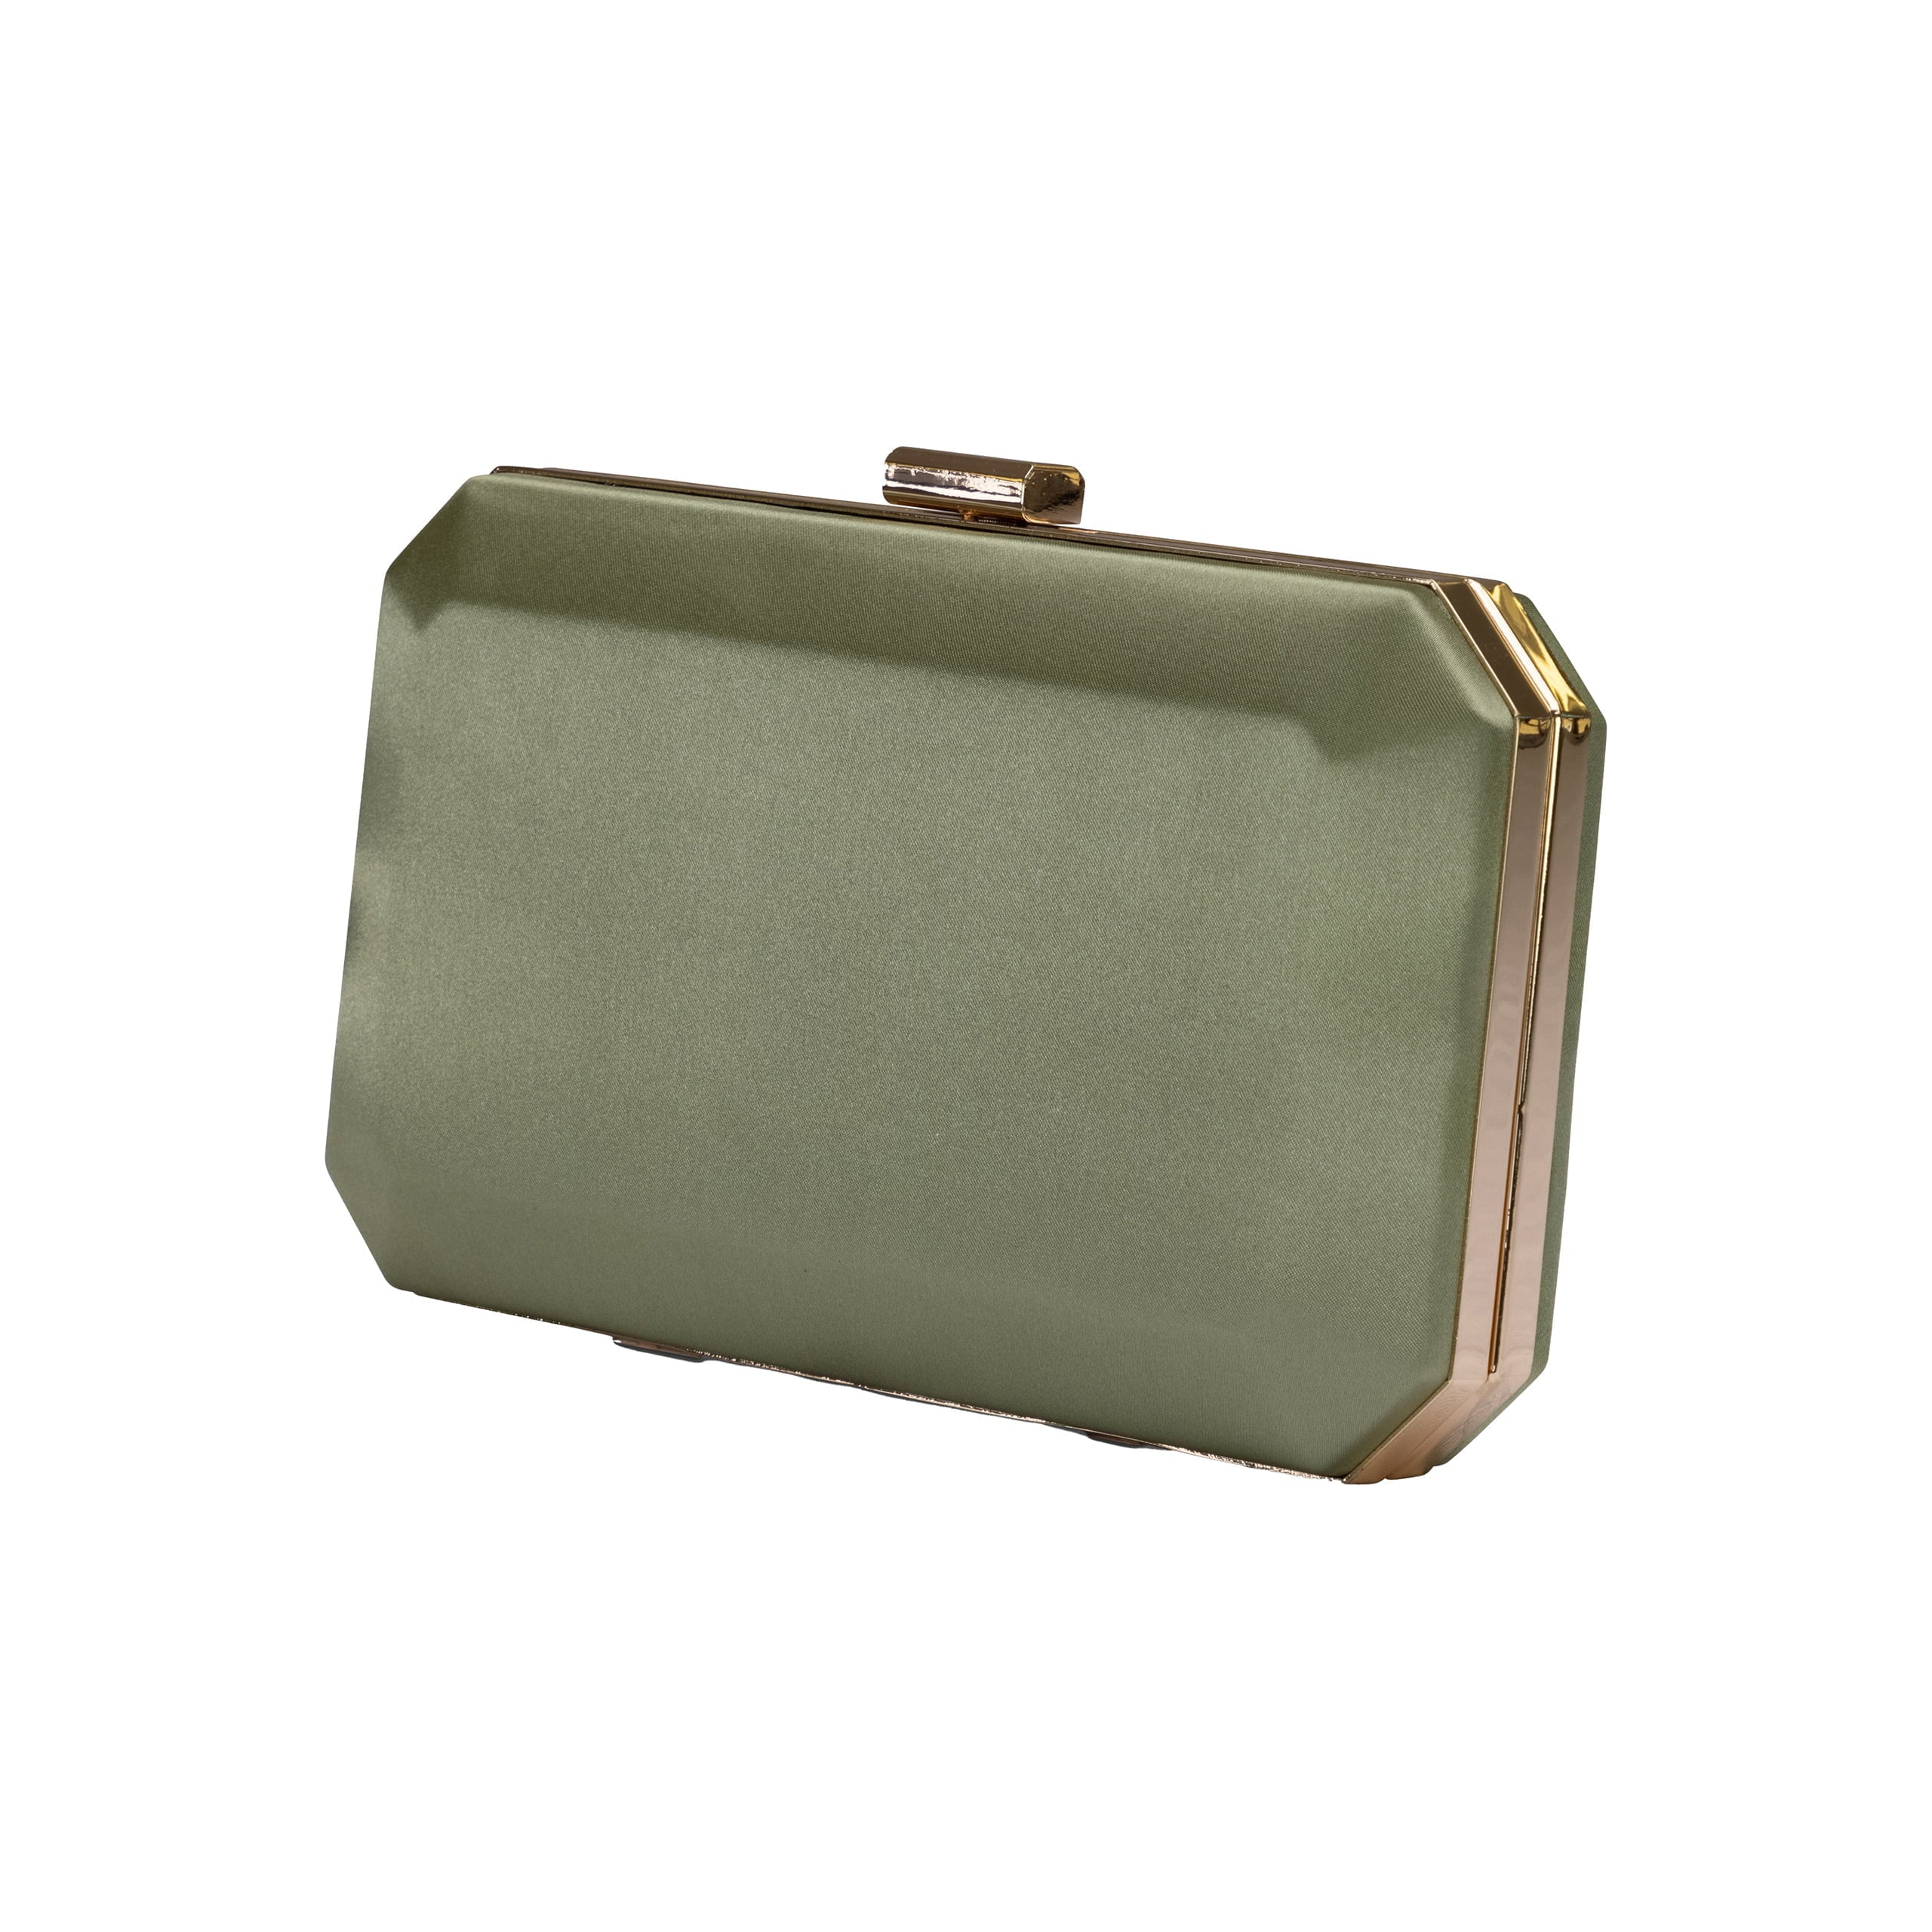 Olive satin Box Clutch - EBONY - part of our shoes and handbags collection